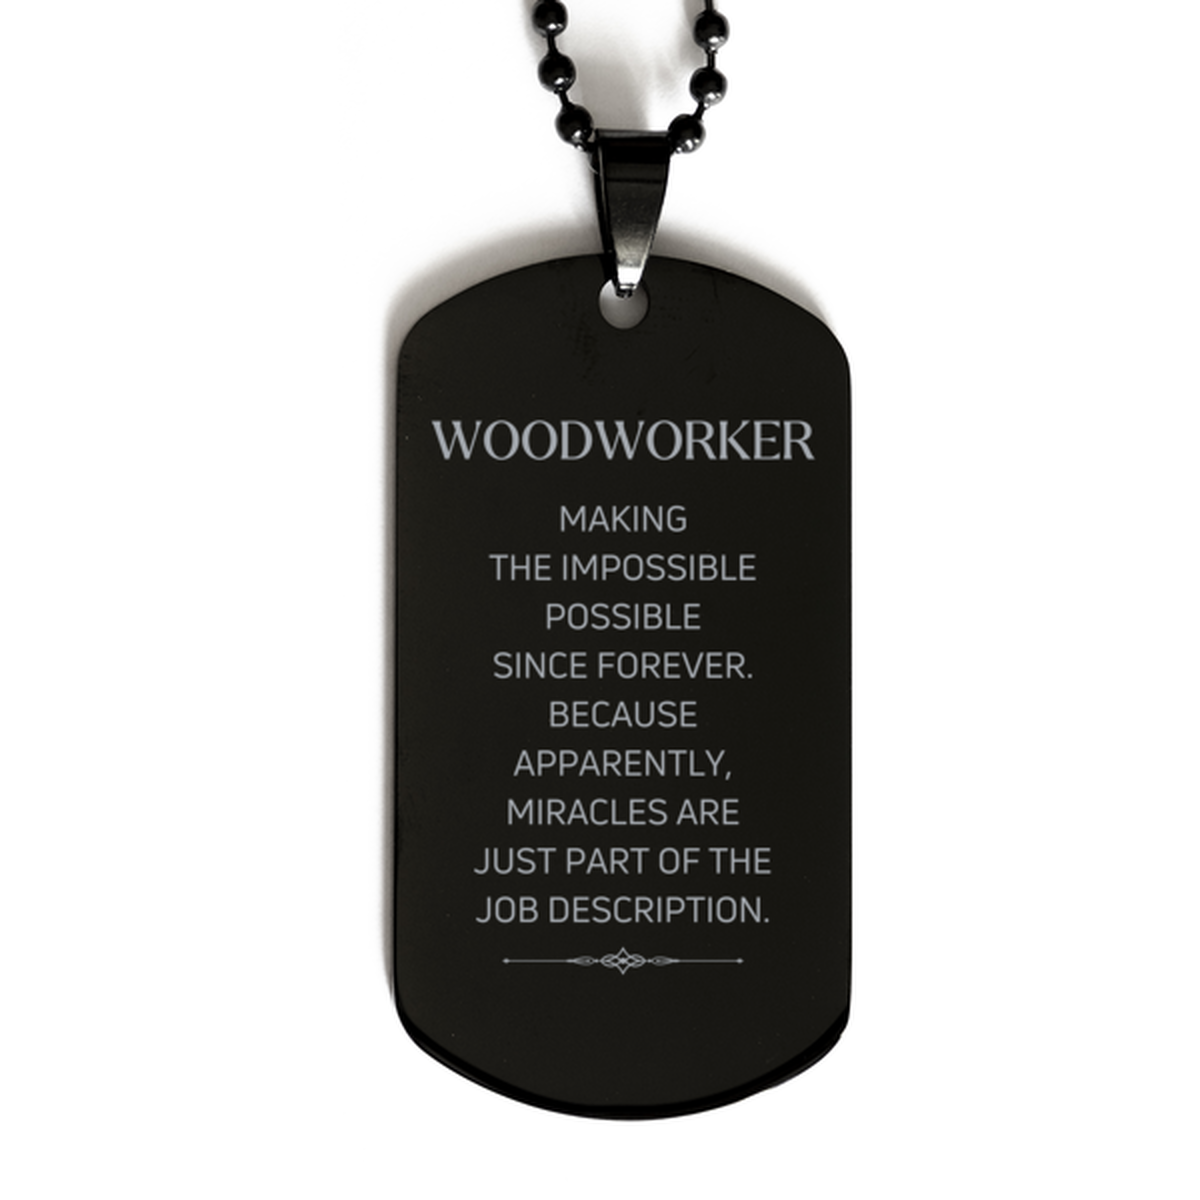 Funny Woodworker Gifts, Miracles are just part of the job description, Inspirational Birthday Black Dog Tag For Woodworker, Men, Women, Coworkers, Friends, Boss